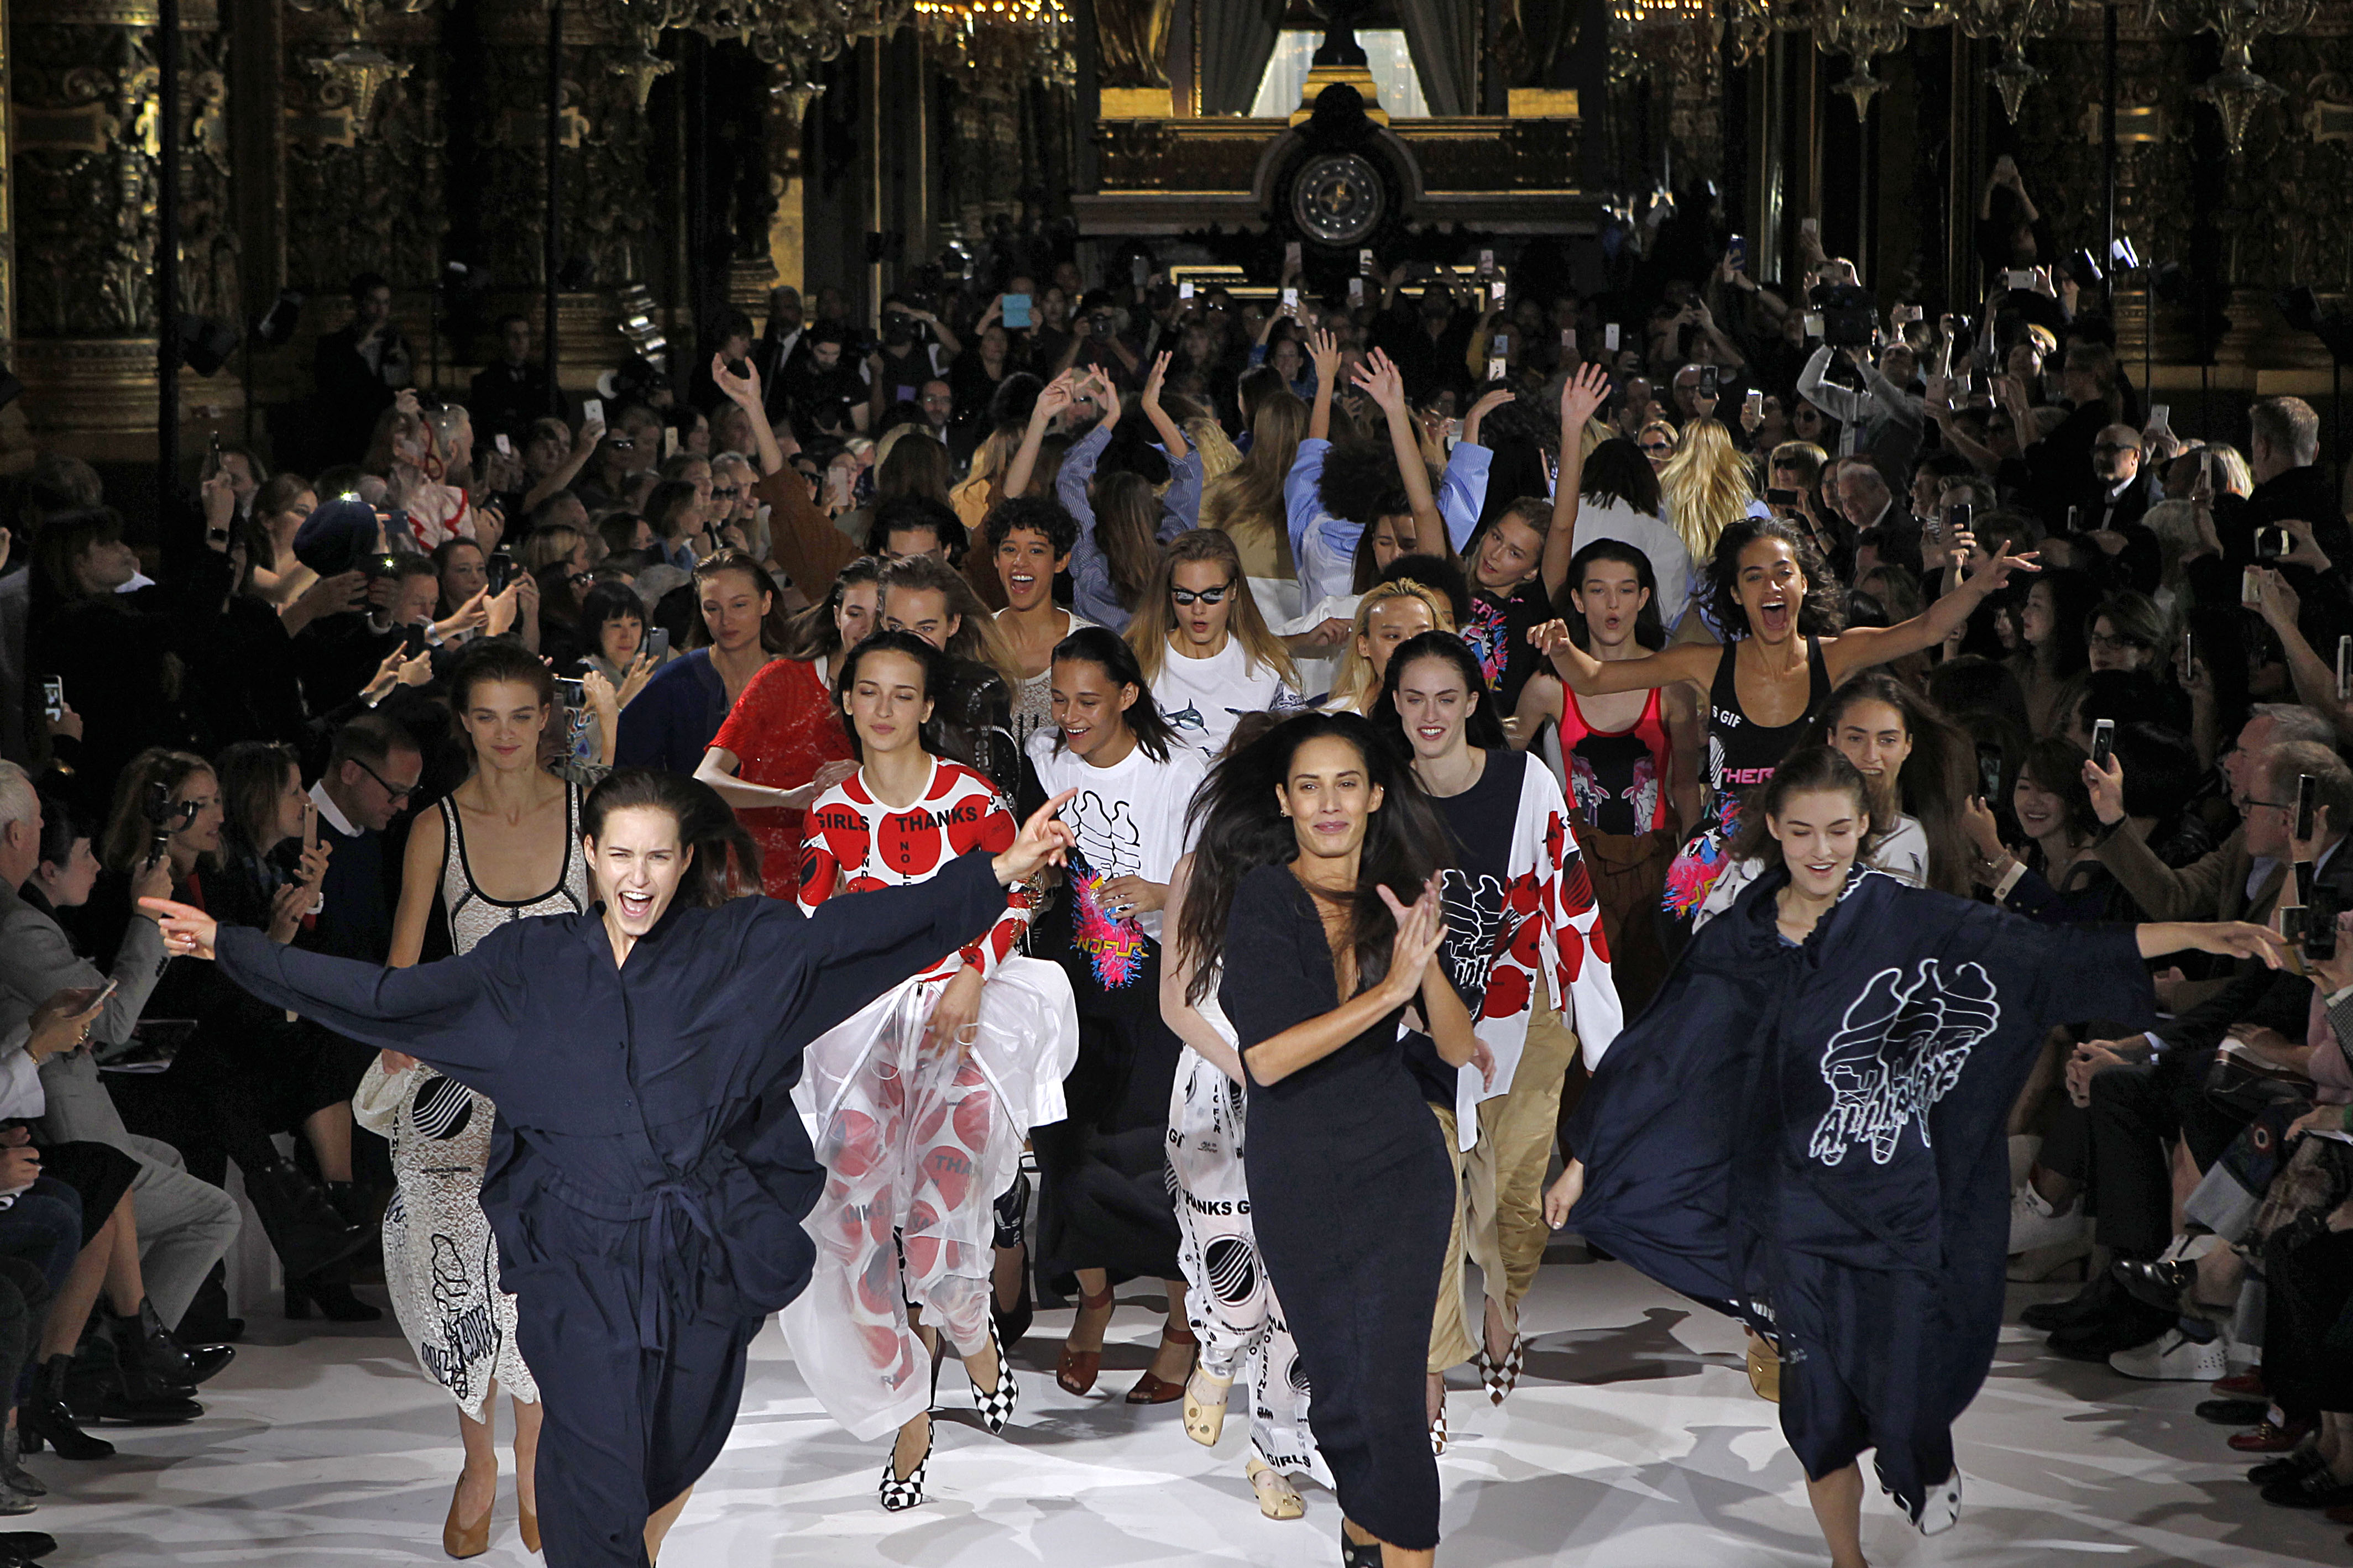 Stella McCartney Brings the Joie to Paris Fashion Week - Daily Front Row